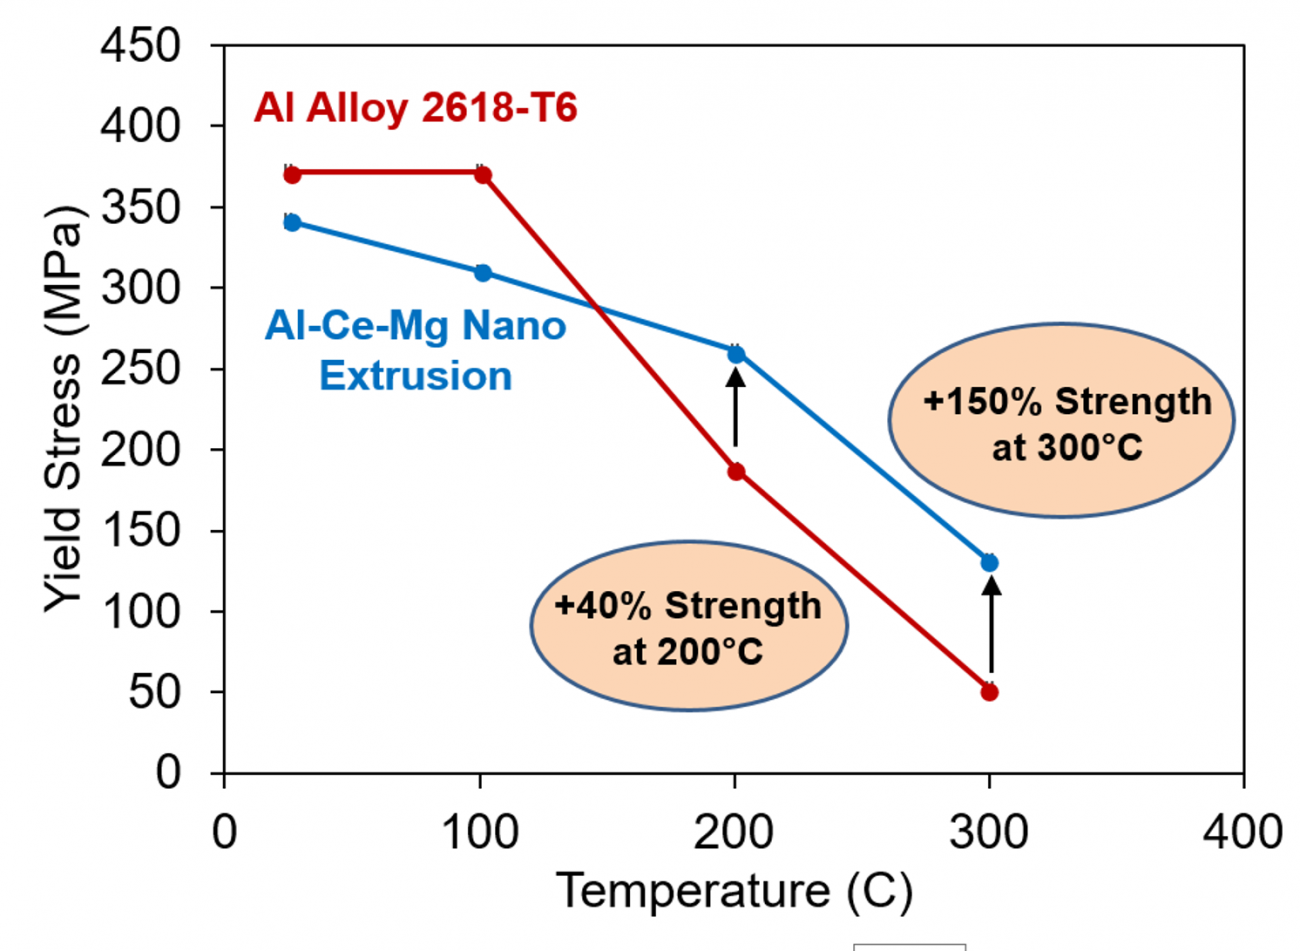 Tensile yield strength of Al-Ce-Mg Nano Extrusion compared to 2618-T6, the commercial high temperature Al alloy of choice